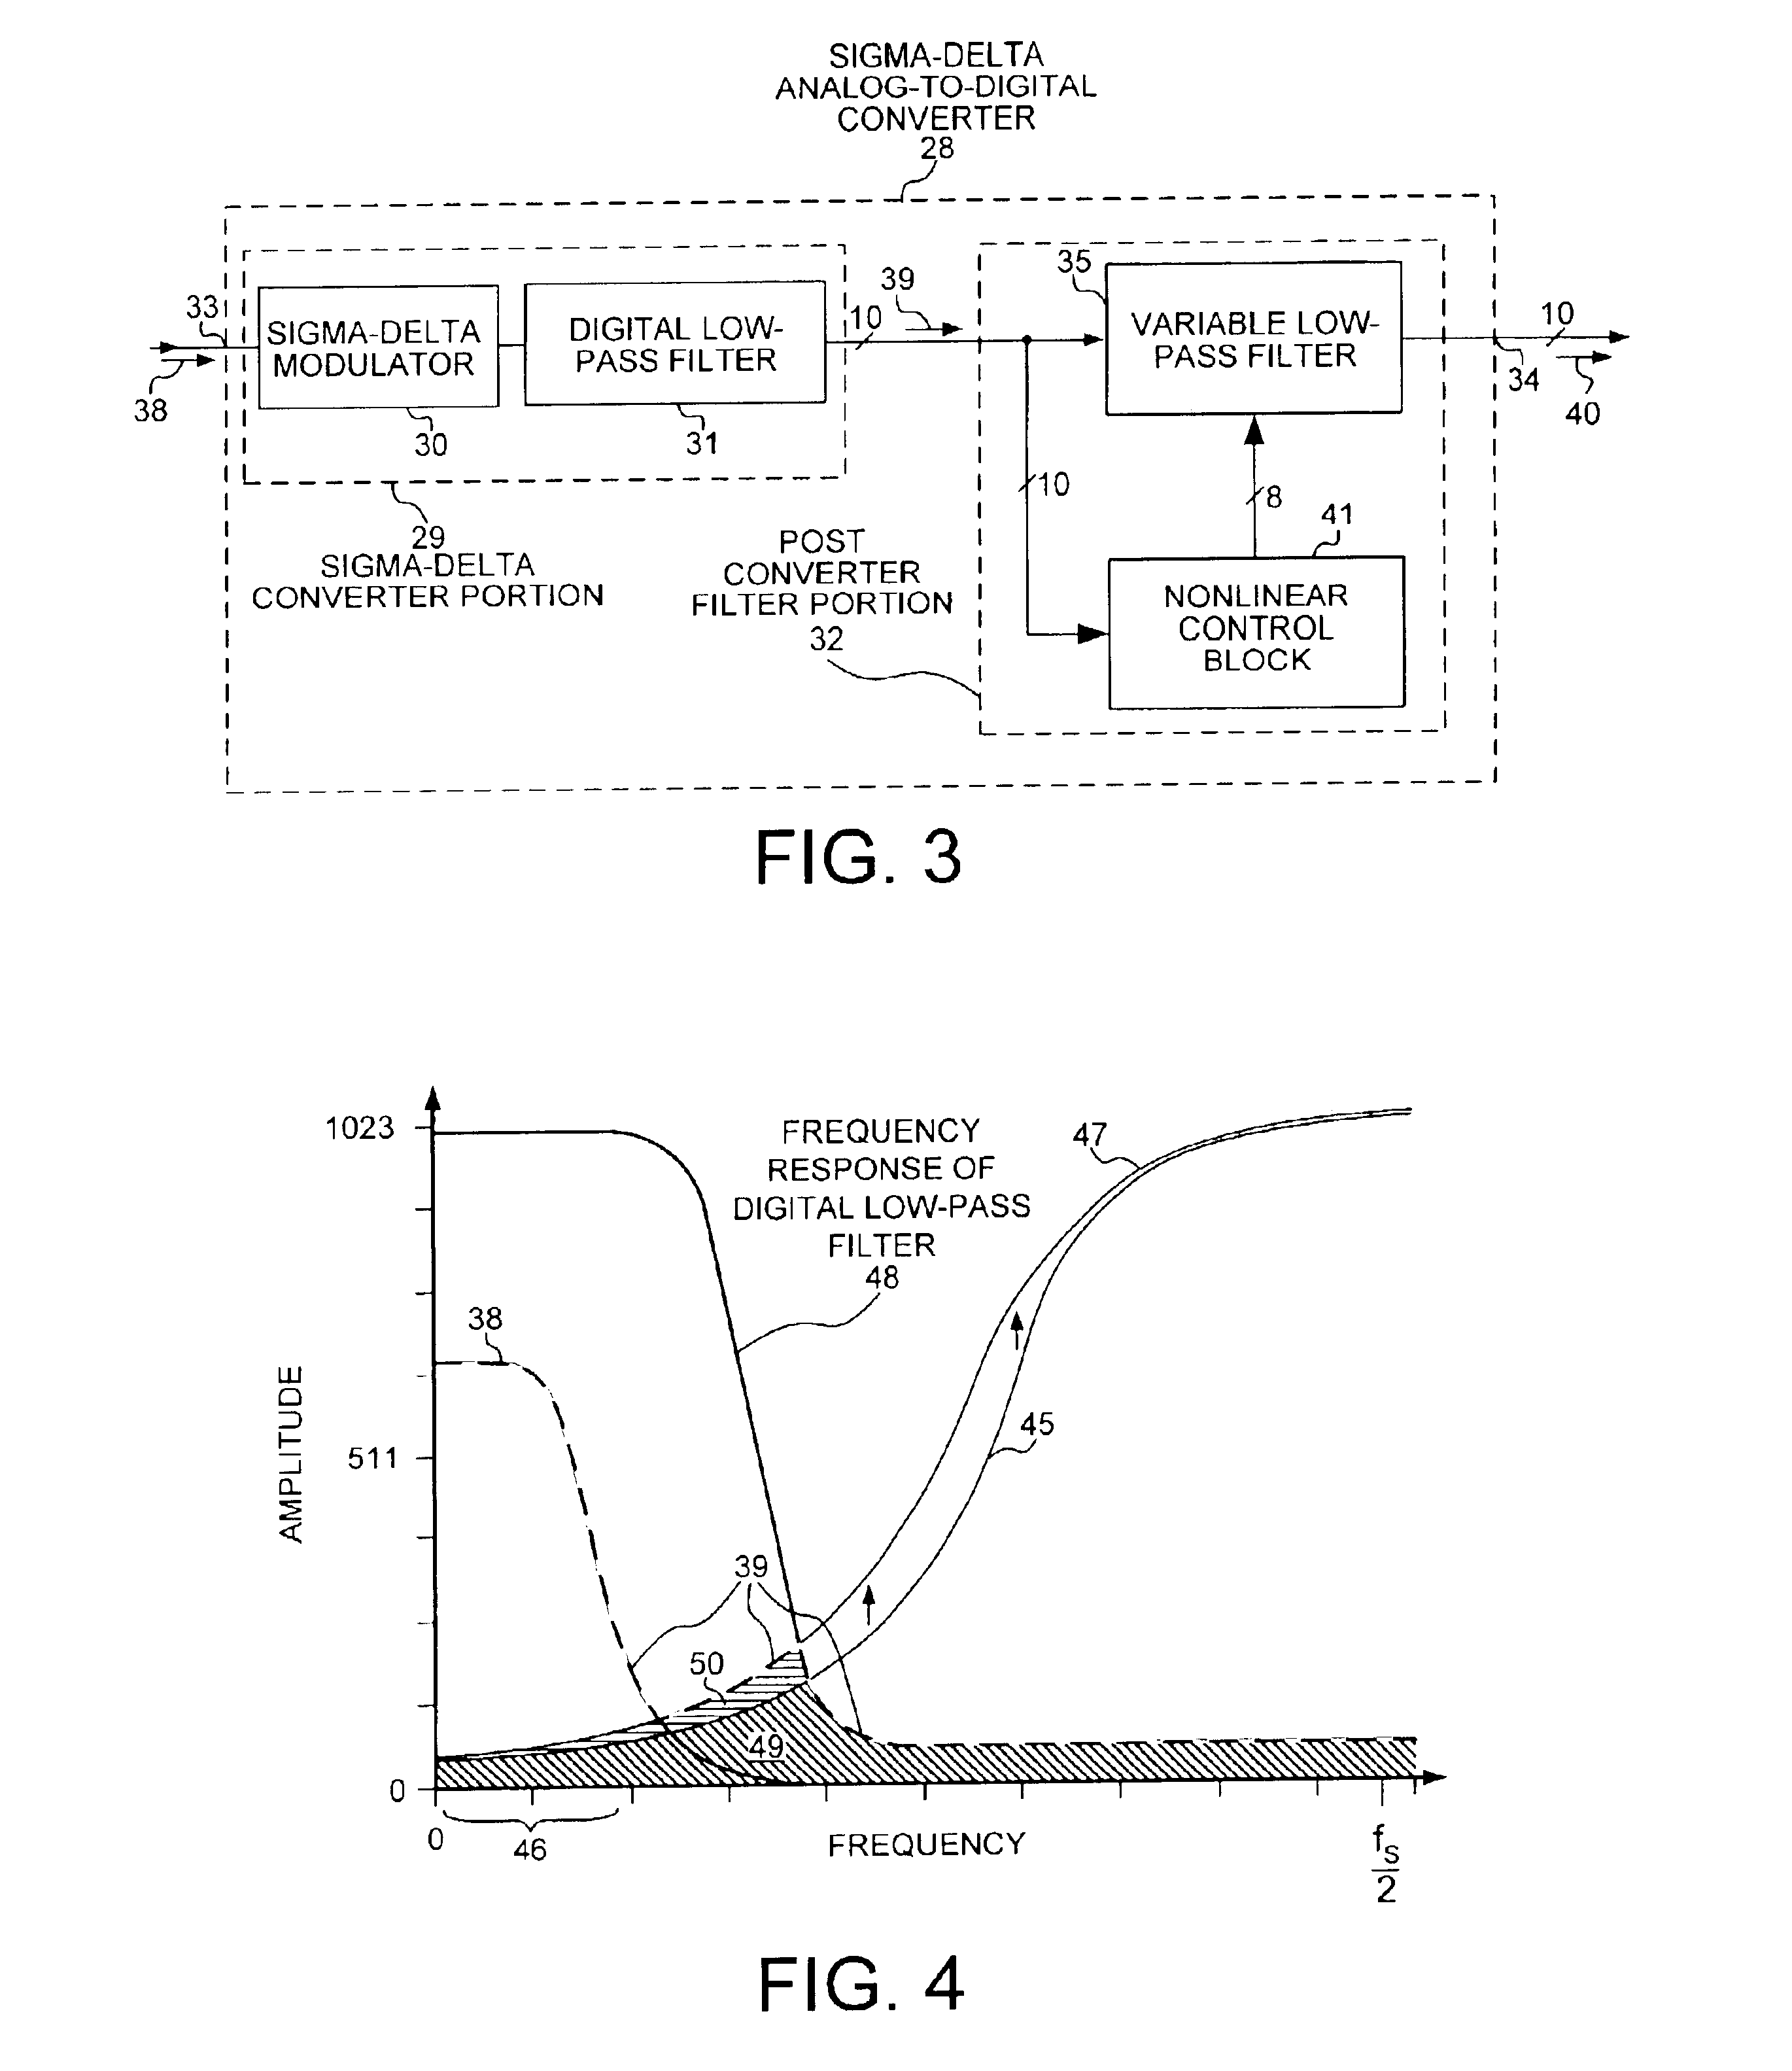 Sigma-delta analog-to-digital converter with reduced quantization noise